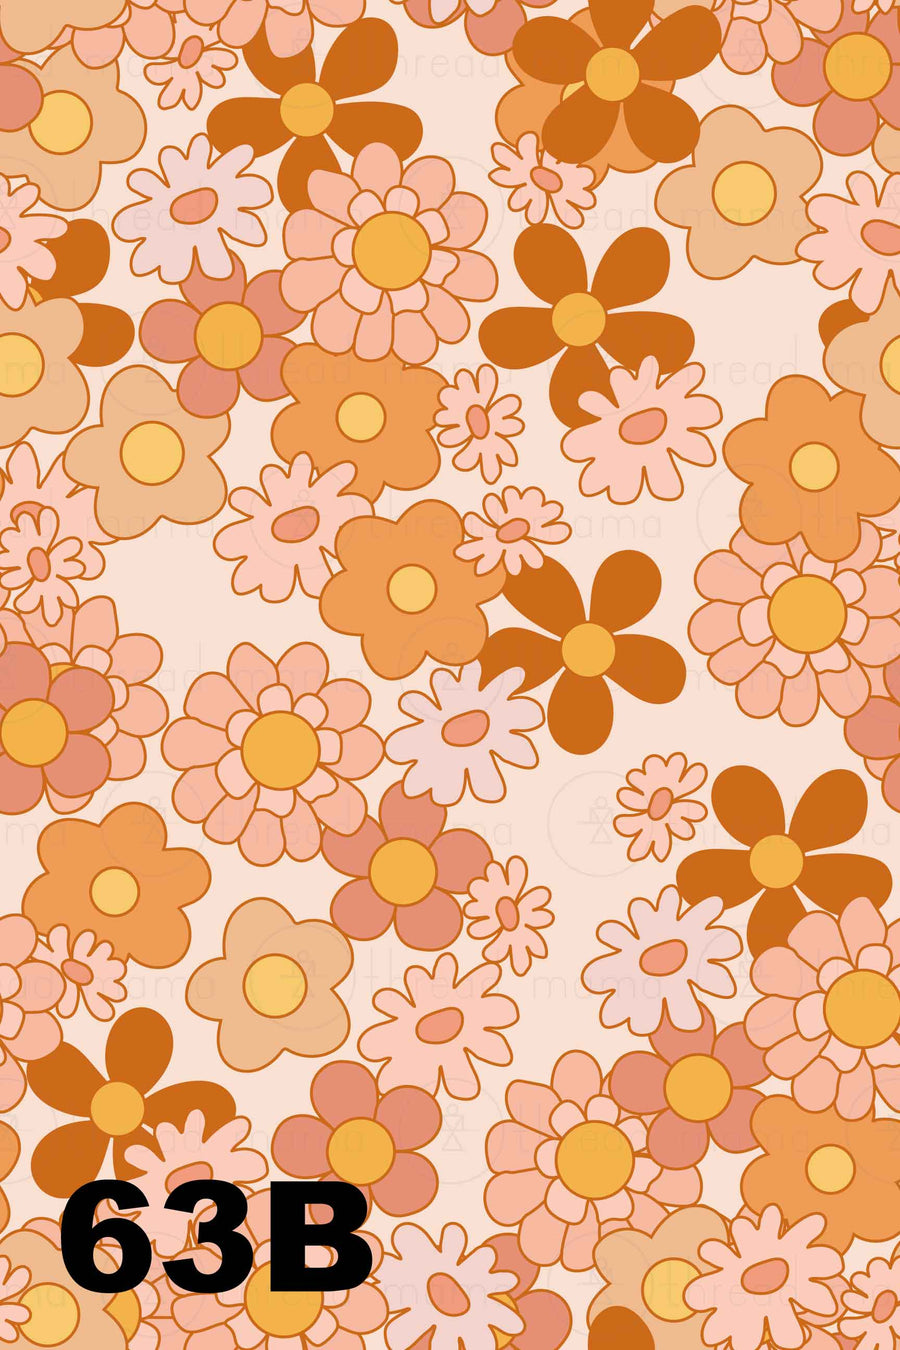 Background Patterns 63, and 63B